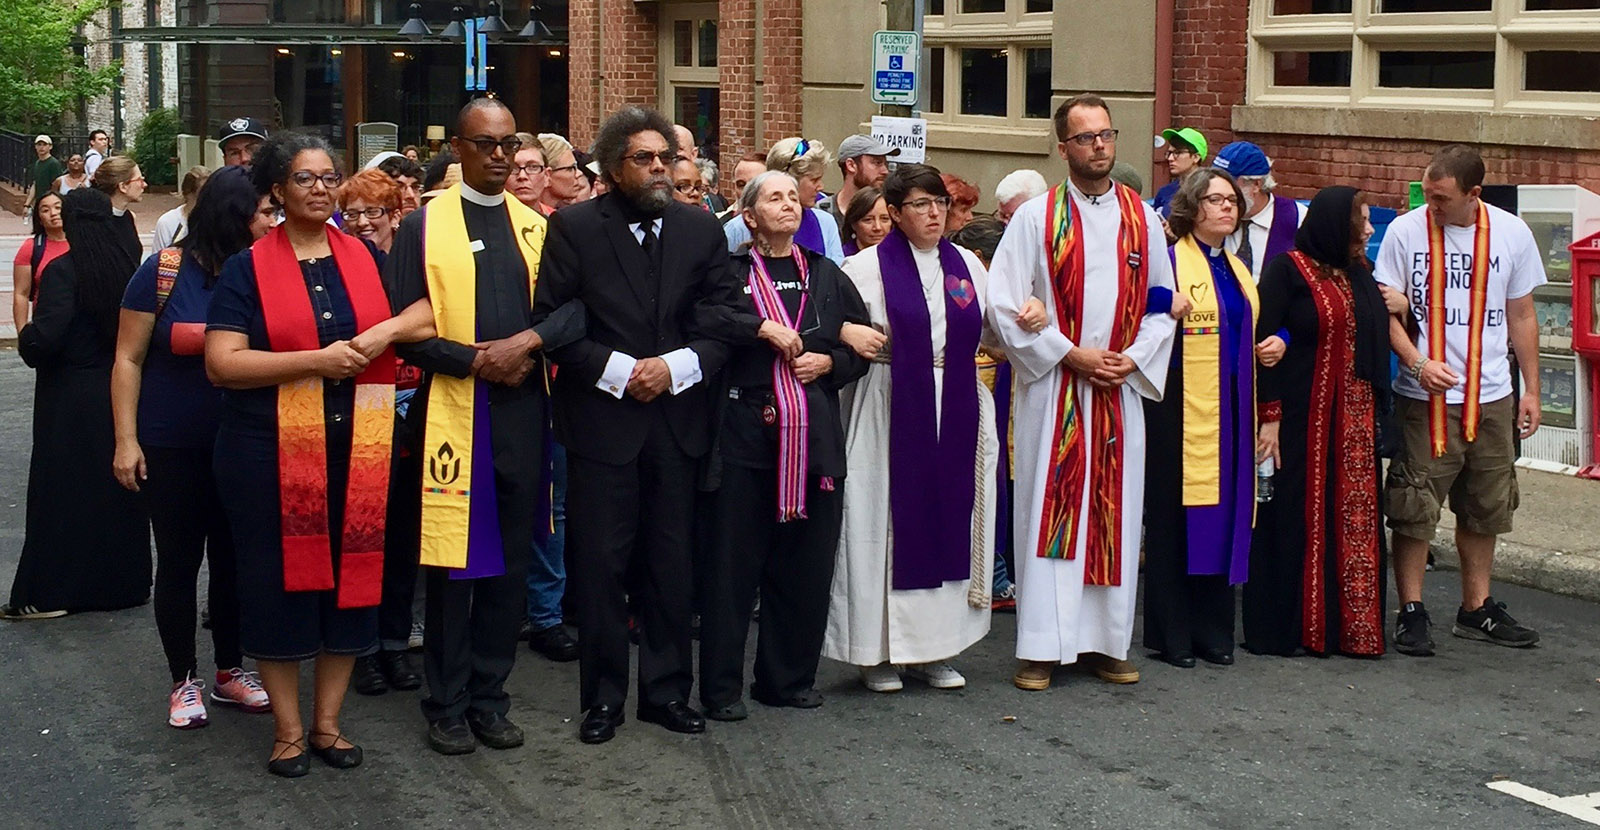 The Rev. Susan Frederick-Gray, third from right with yellow stoll, marches with other clergy in Charlottesville in 2017. Photo © 2017 Nora Rasman/UUA